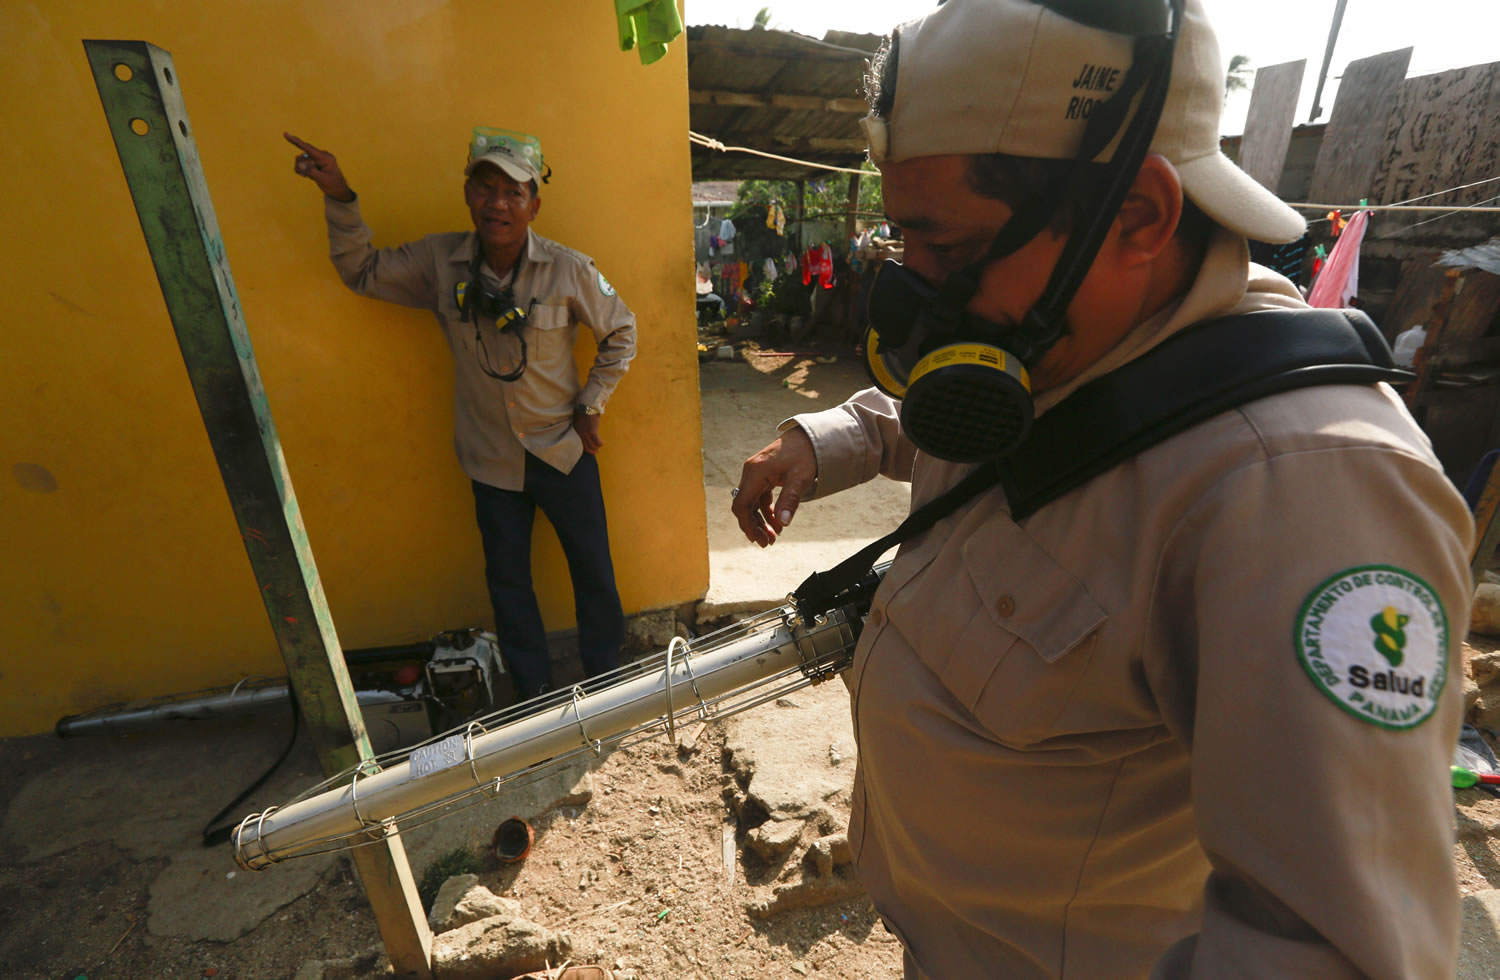 Health Ministry workers get ready to fumigate for the Aedes aegypti mosquito in Veracruz, Panama, on Thursday. The Aedes aegypti mosquito is vector for the spread of the Zika virus.